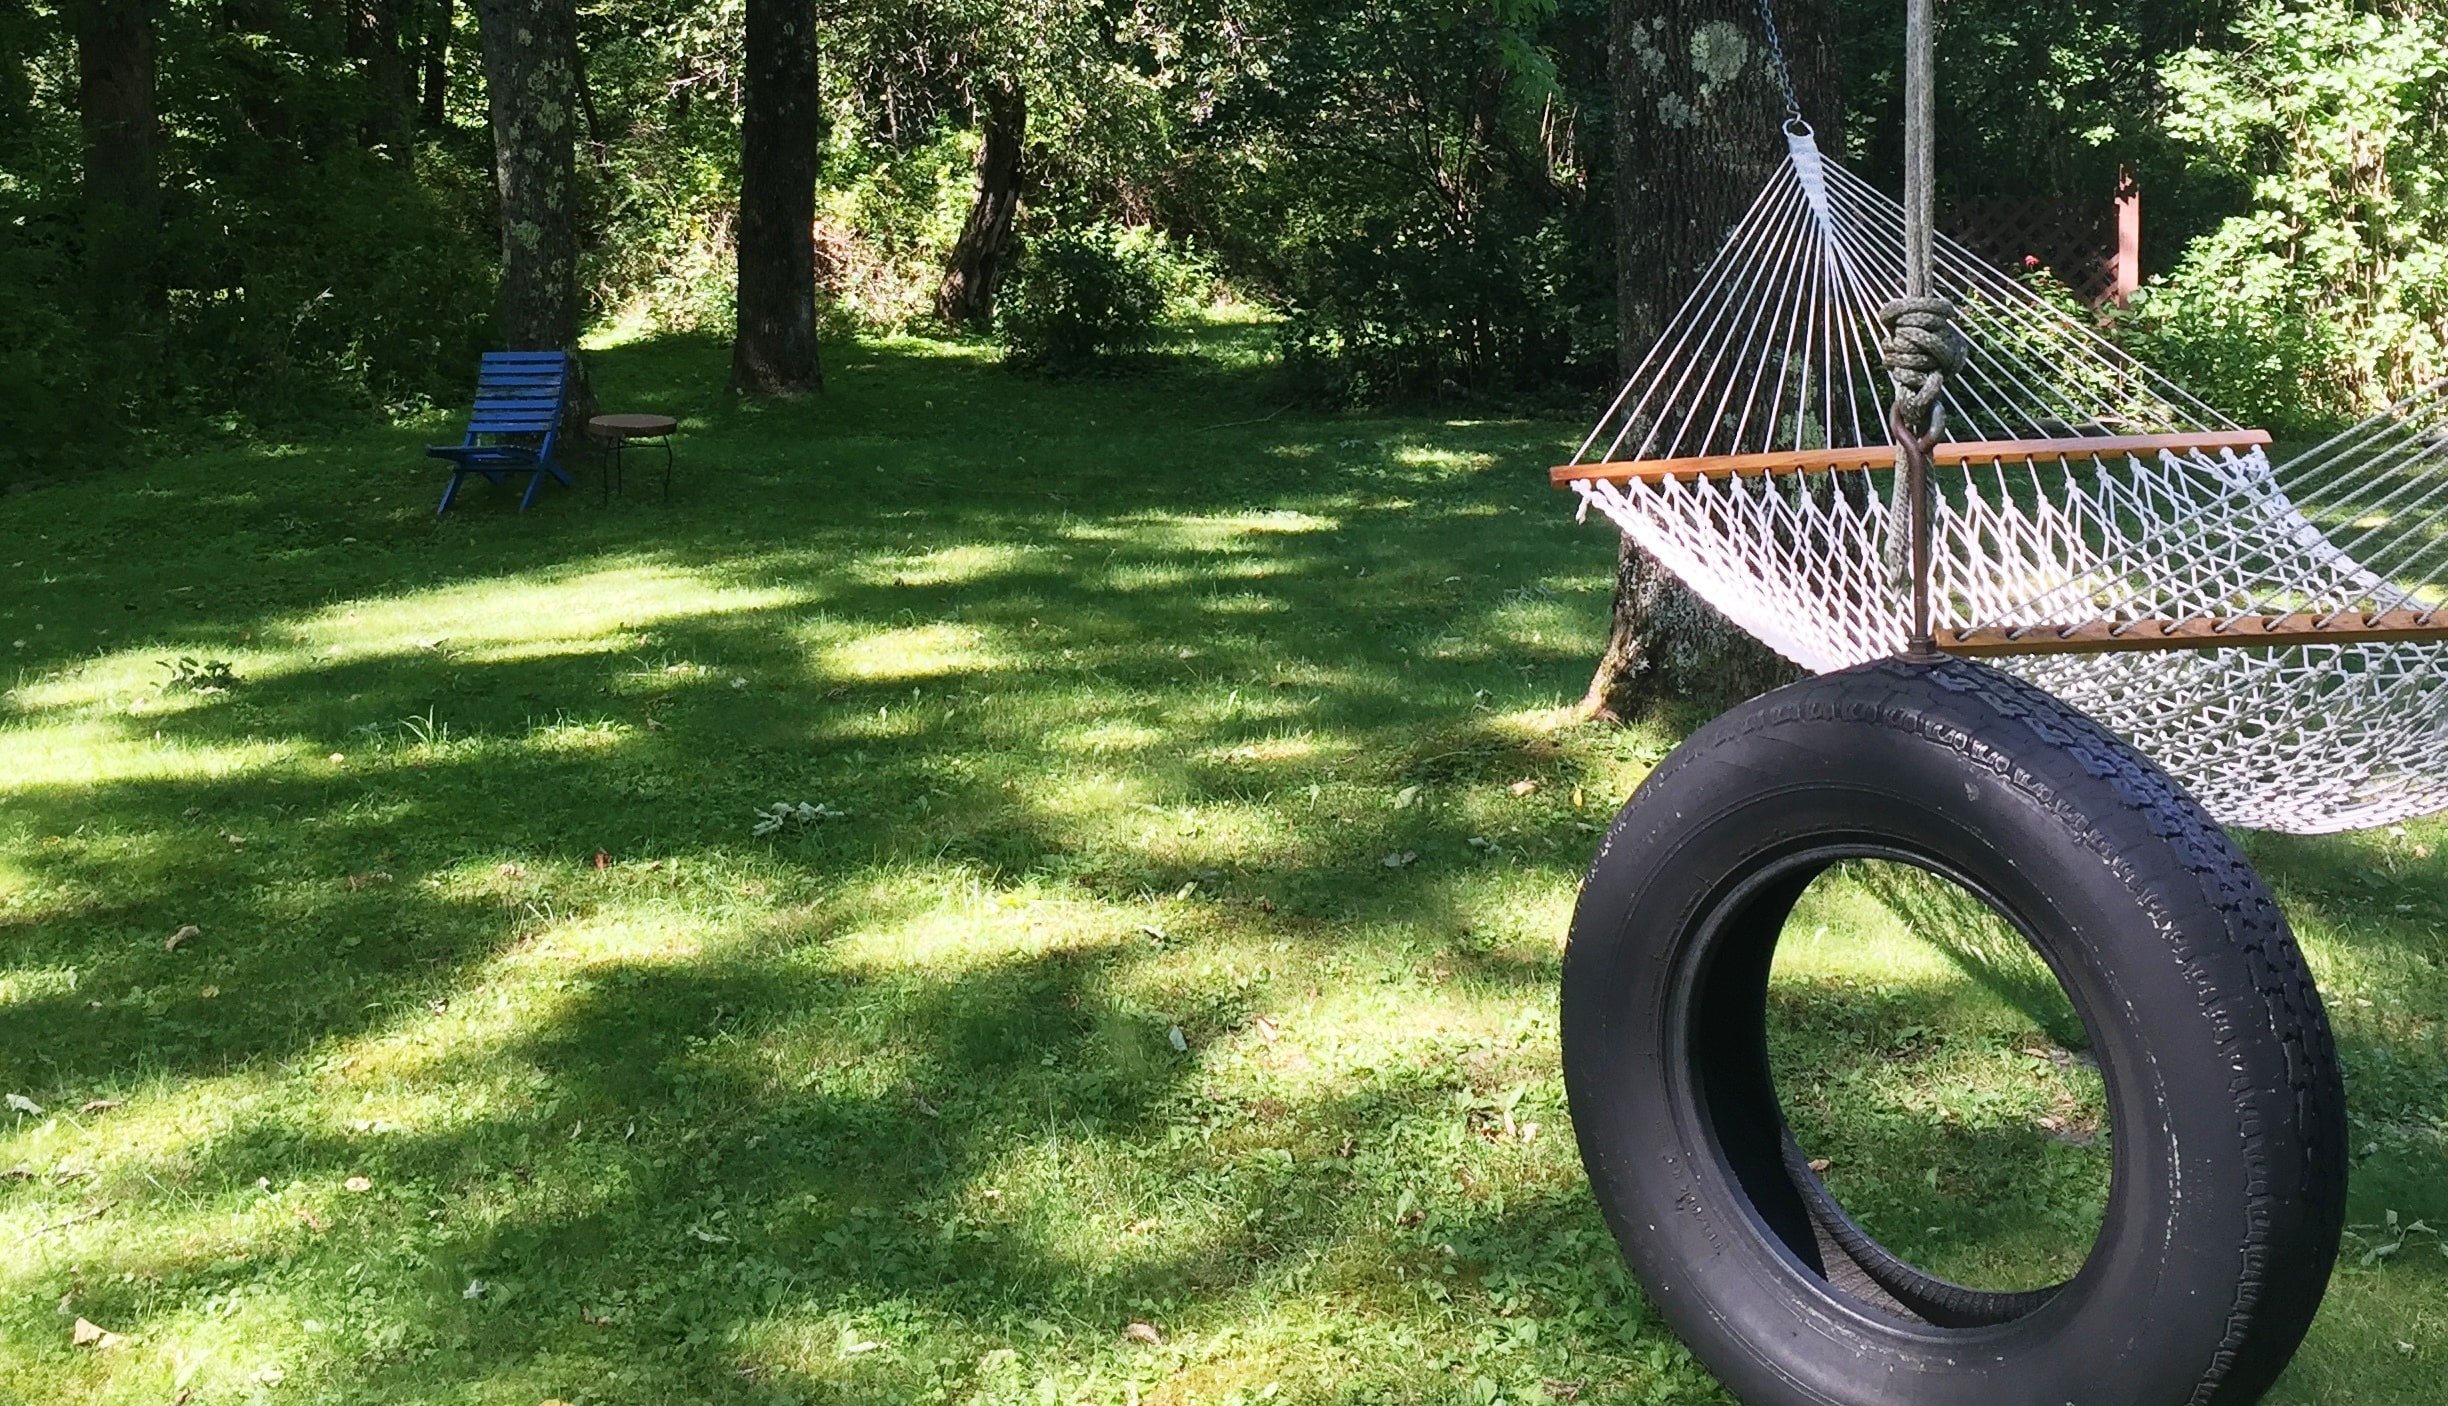 Relax on the hammock. Play on the tire swing!